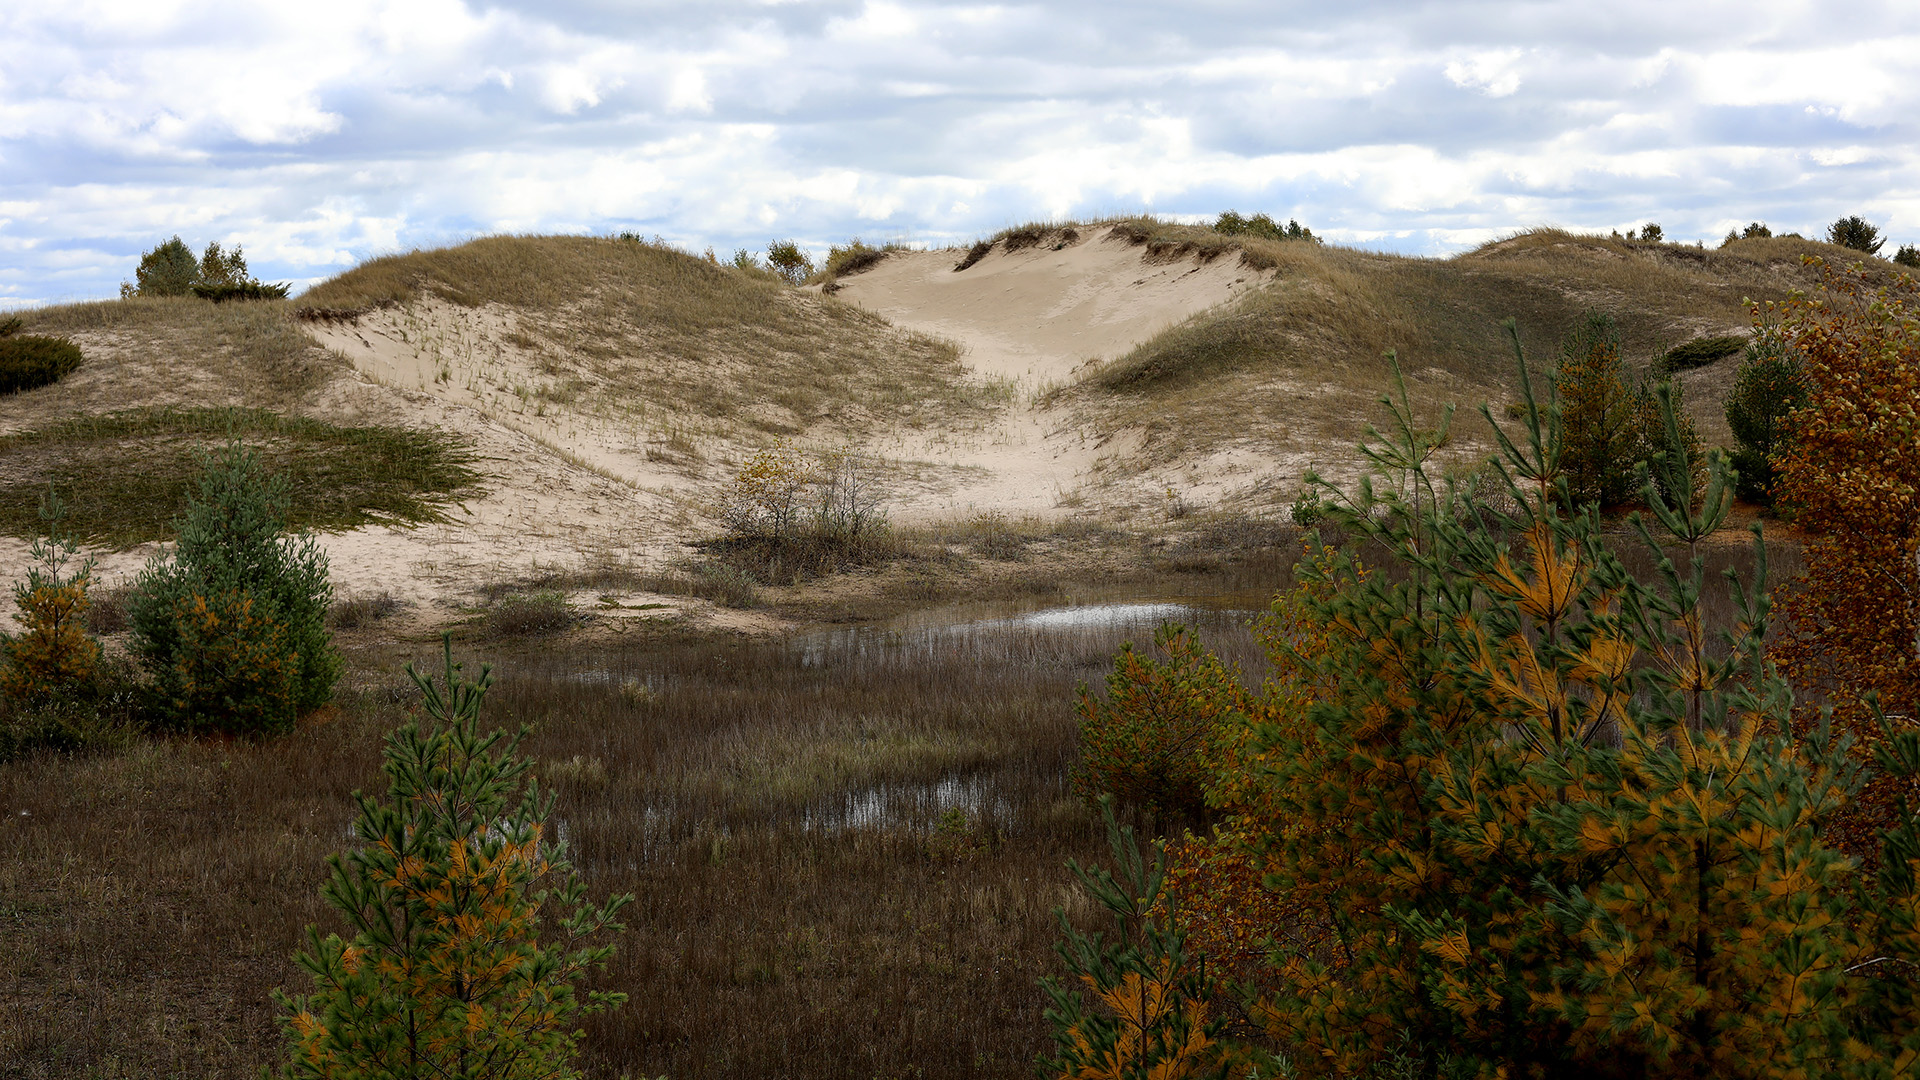 Grasses cover portions of multiple sand dunes, with wetlands and trees in the foreground and more trees on the horizon under a mostly cloudy sky.